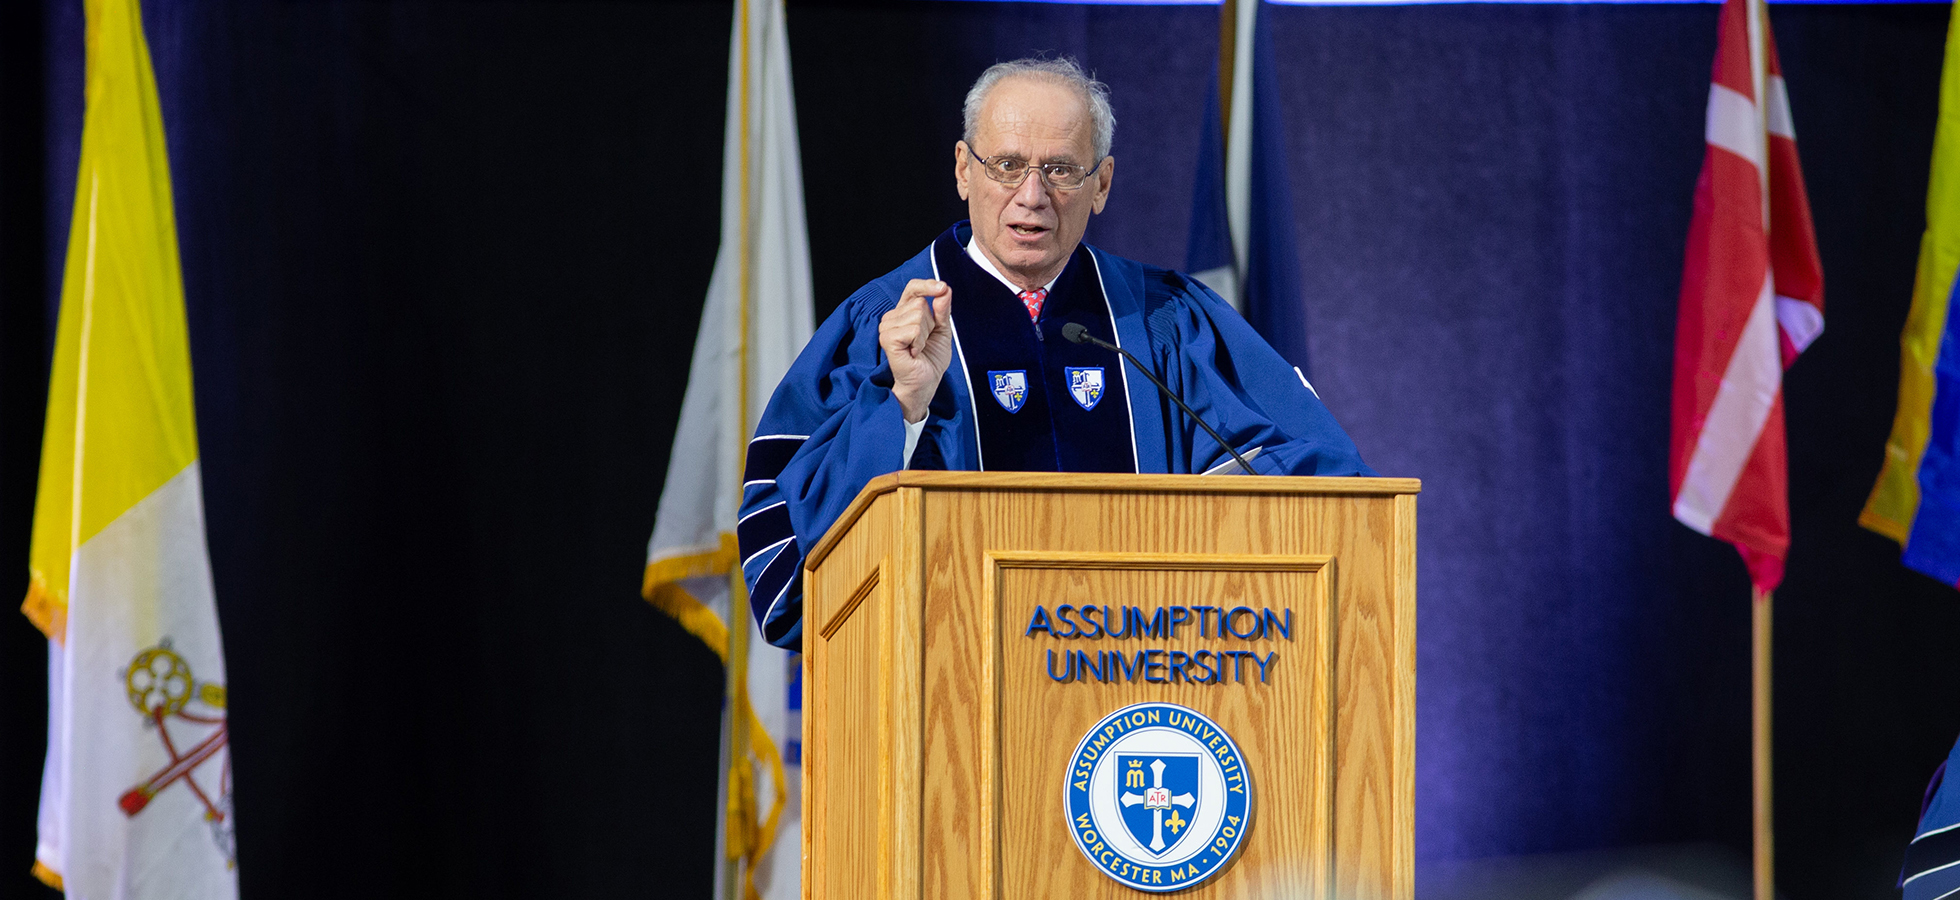 Lucchino touts bonds between Assumption and WooSox as he gives grads grand slam send off Sunday